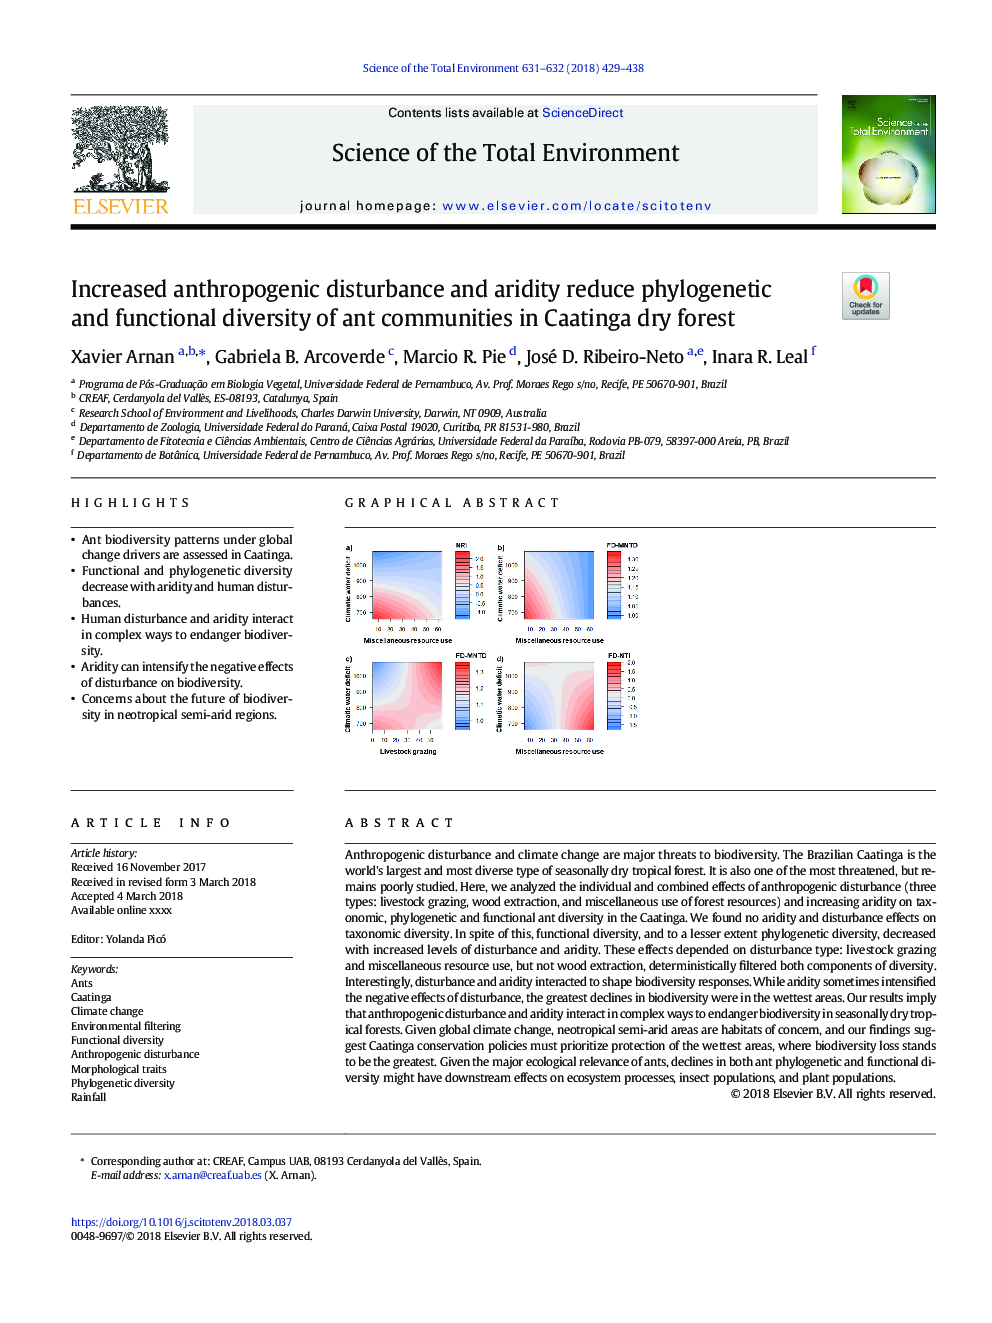 Increased anthropogenic disturbance and aridity reduce phylogenetic and functional diversity of ant communities in Caatinga dry forest